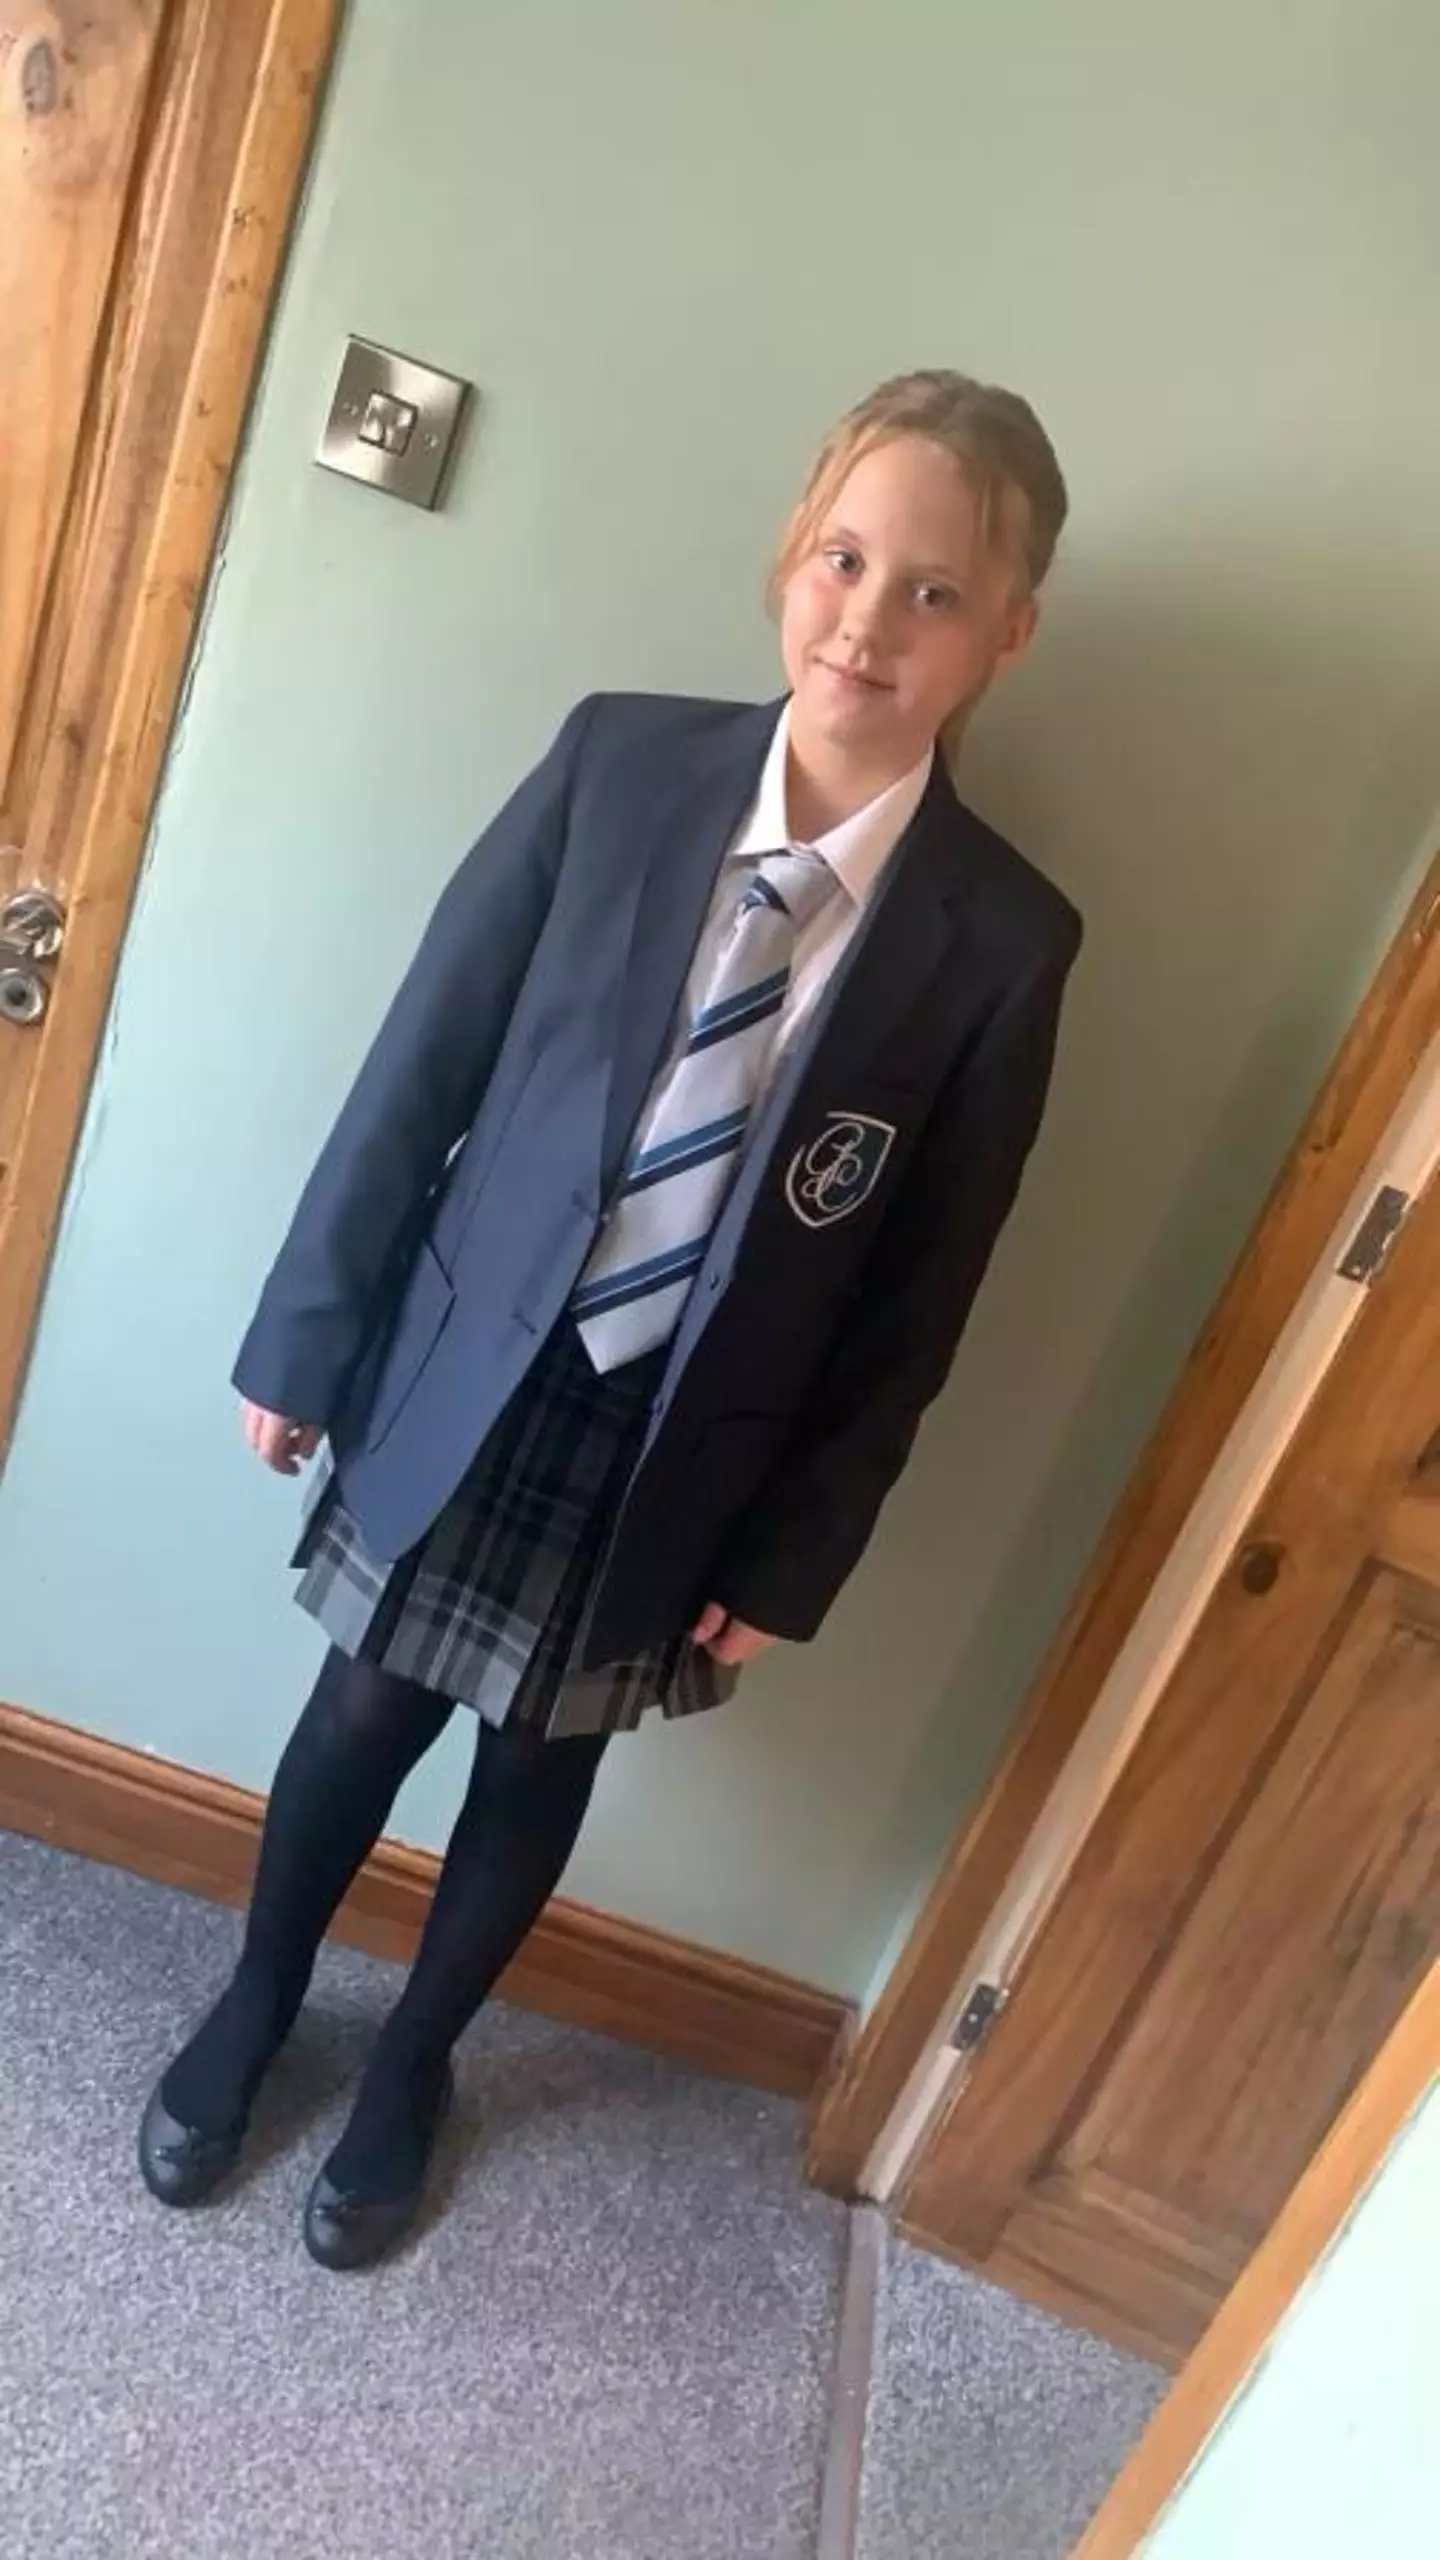 Layla Thomson, 11, was sent home for her shoes.